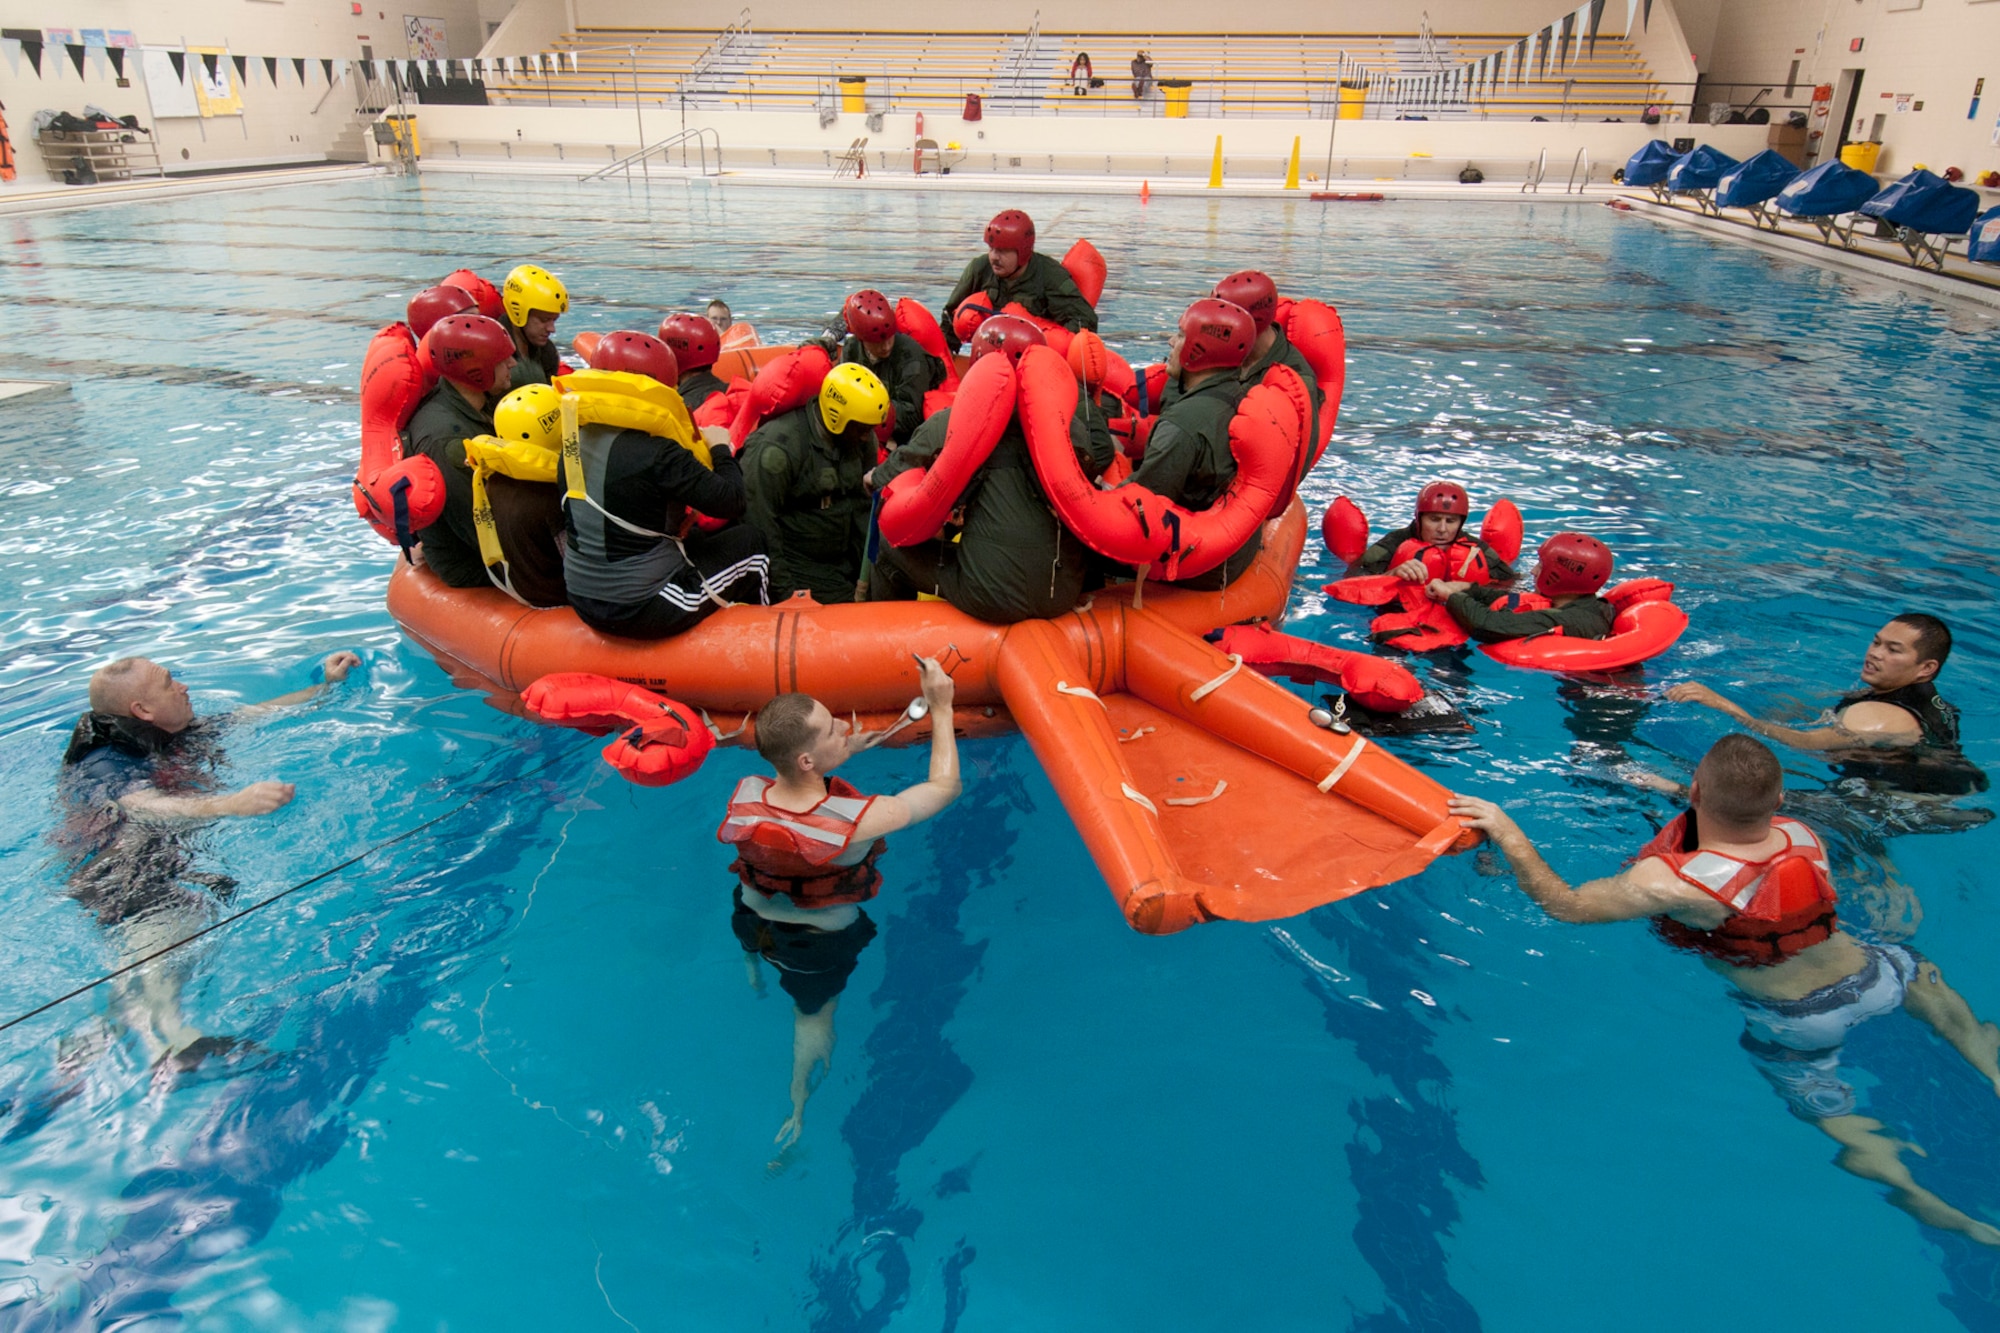 Airmen from the 171st Air Refueling Squadron sit in an emergency life raft during a water survival training exercise in the pool of L’Anse Cruese North High School, near Selfridge Air National Guard Base, Mich., Oct. 16, 2012. Since Air Force air crews operate in a worldwide environment, they must train for every contingency scenario, including the possibility of a downed aircraft in an ocean or lake.  The 171st flies the KC-135 Stratotanker, which can carry approximately 50 passengers. (Air National Guard photo by TSgt. Robert Hanet)